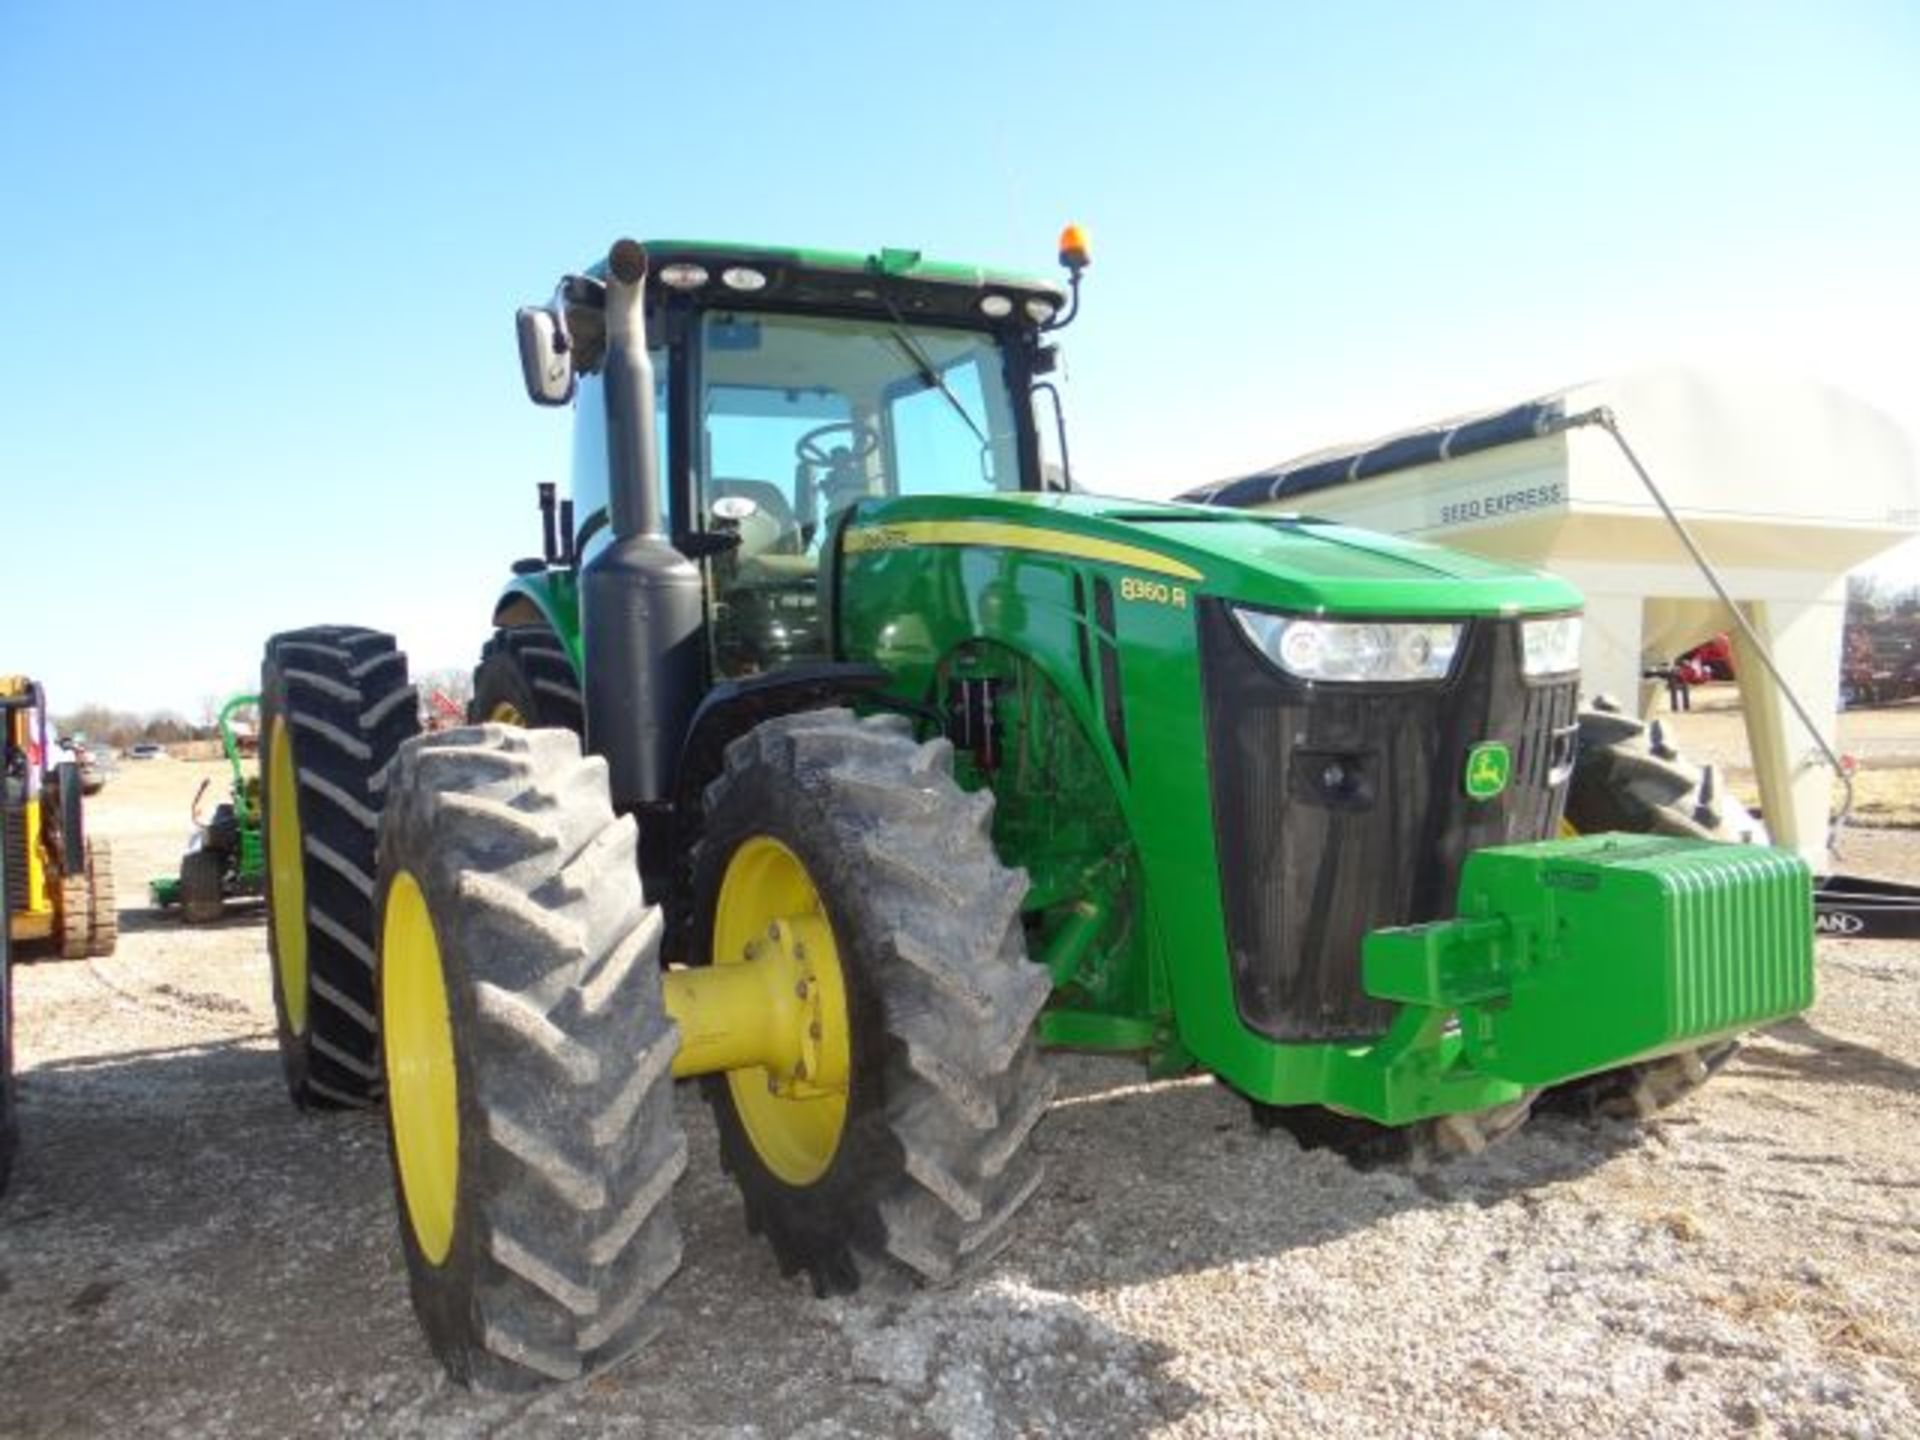 JD 8360R Tractor, 2012 50", Rear Tires, Front Duals, 4 Remotes, Auto Trac, IVT, ILS, Wts, 5244 hrs - Image 6 of 6